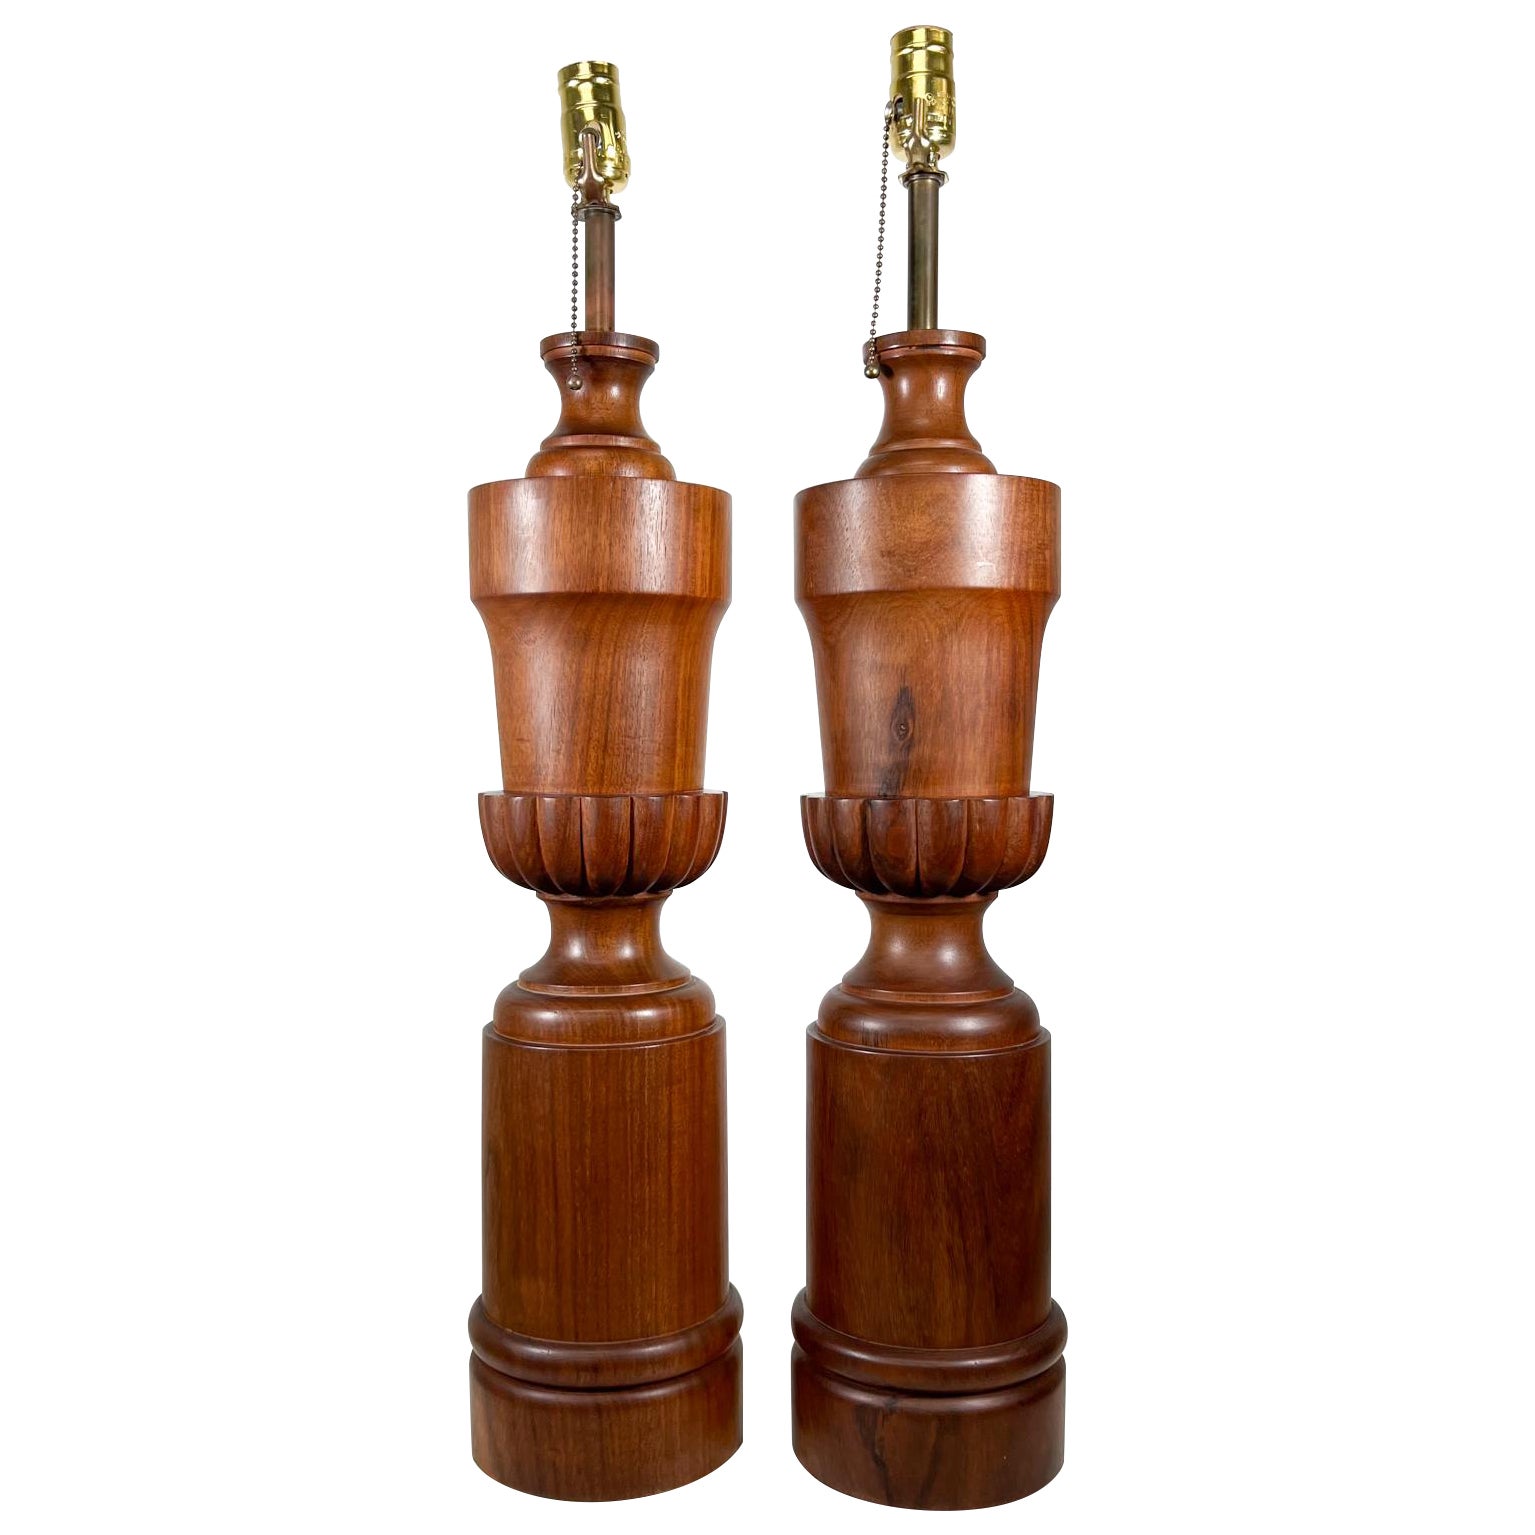 1950s Sculptural Modern Table Lamps Solid African Mahogany Wood For Sale